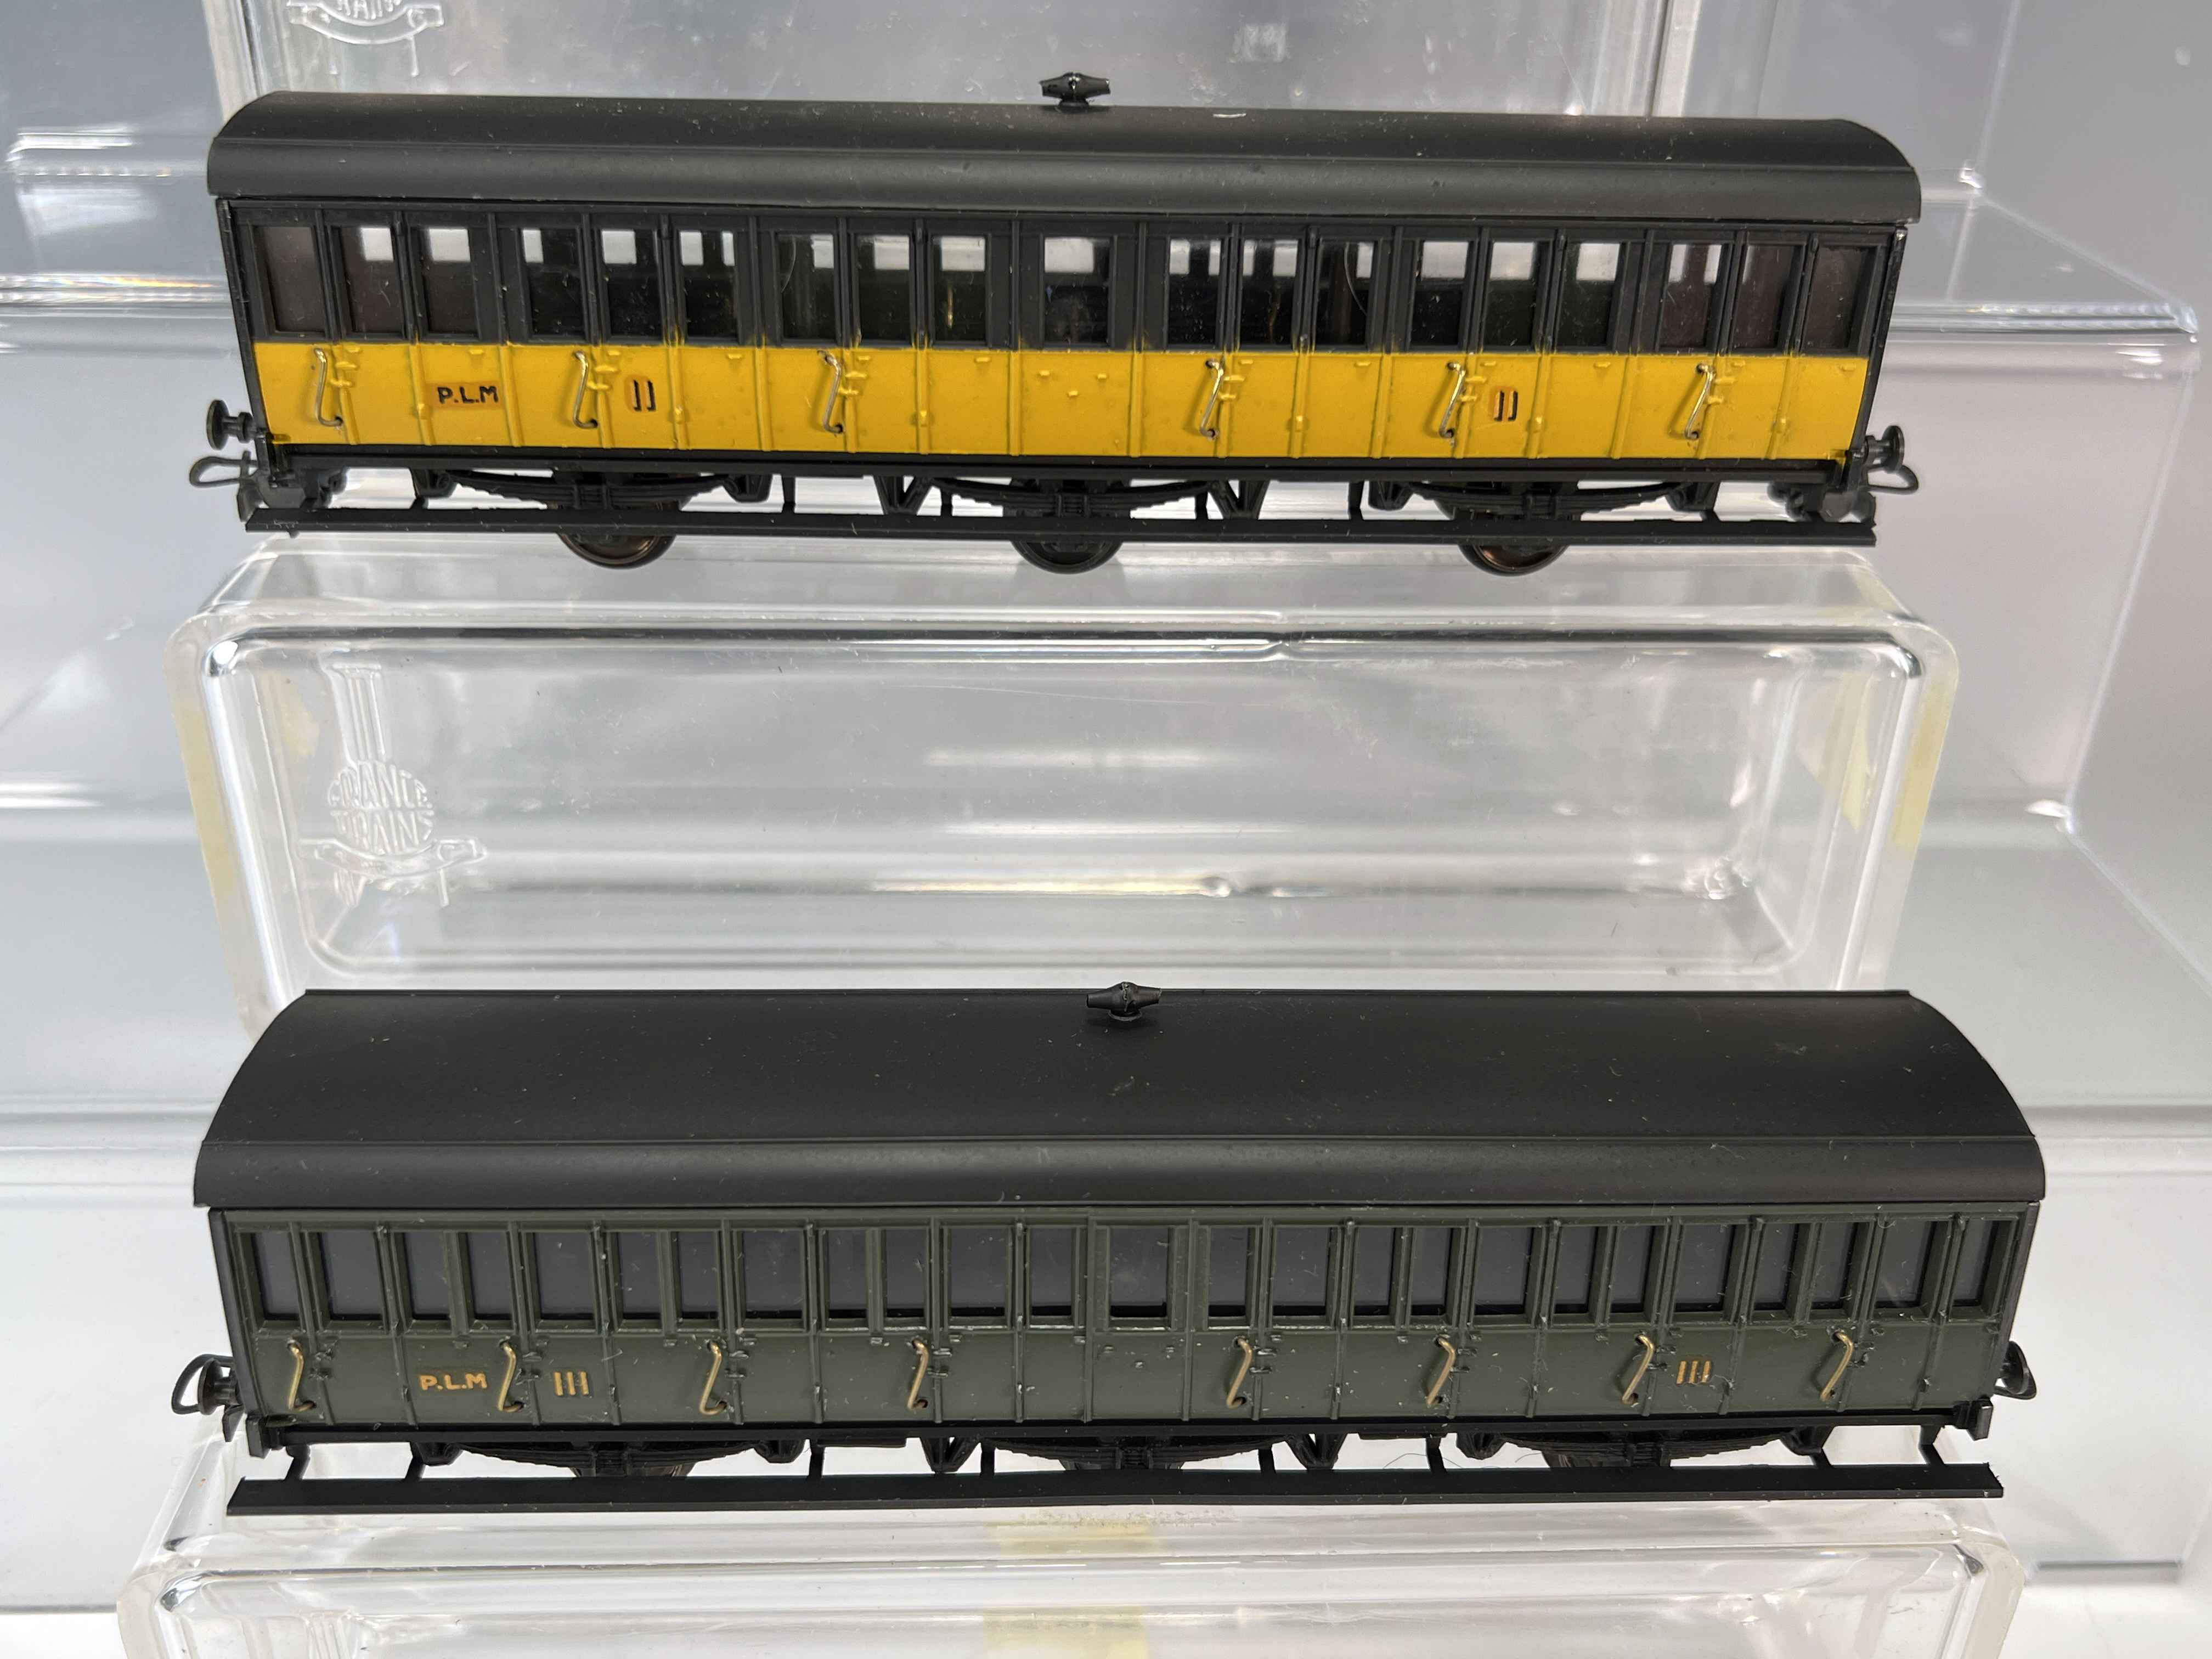 5 France Trains In Plastic Cases image 4